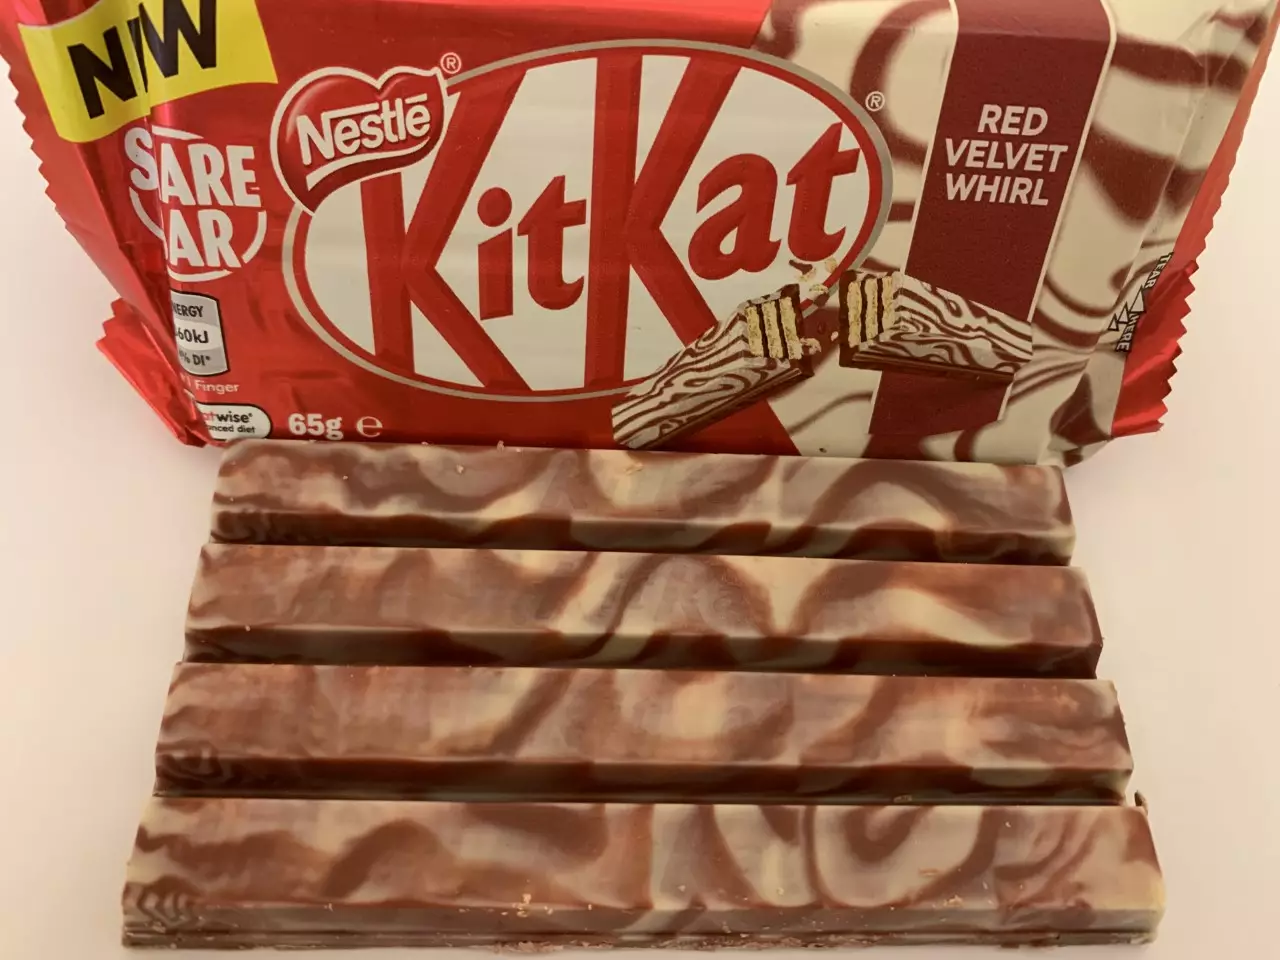 The KitKats have cream cheese swirls on top of the chocolate coating. (